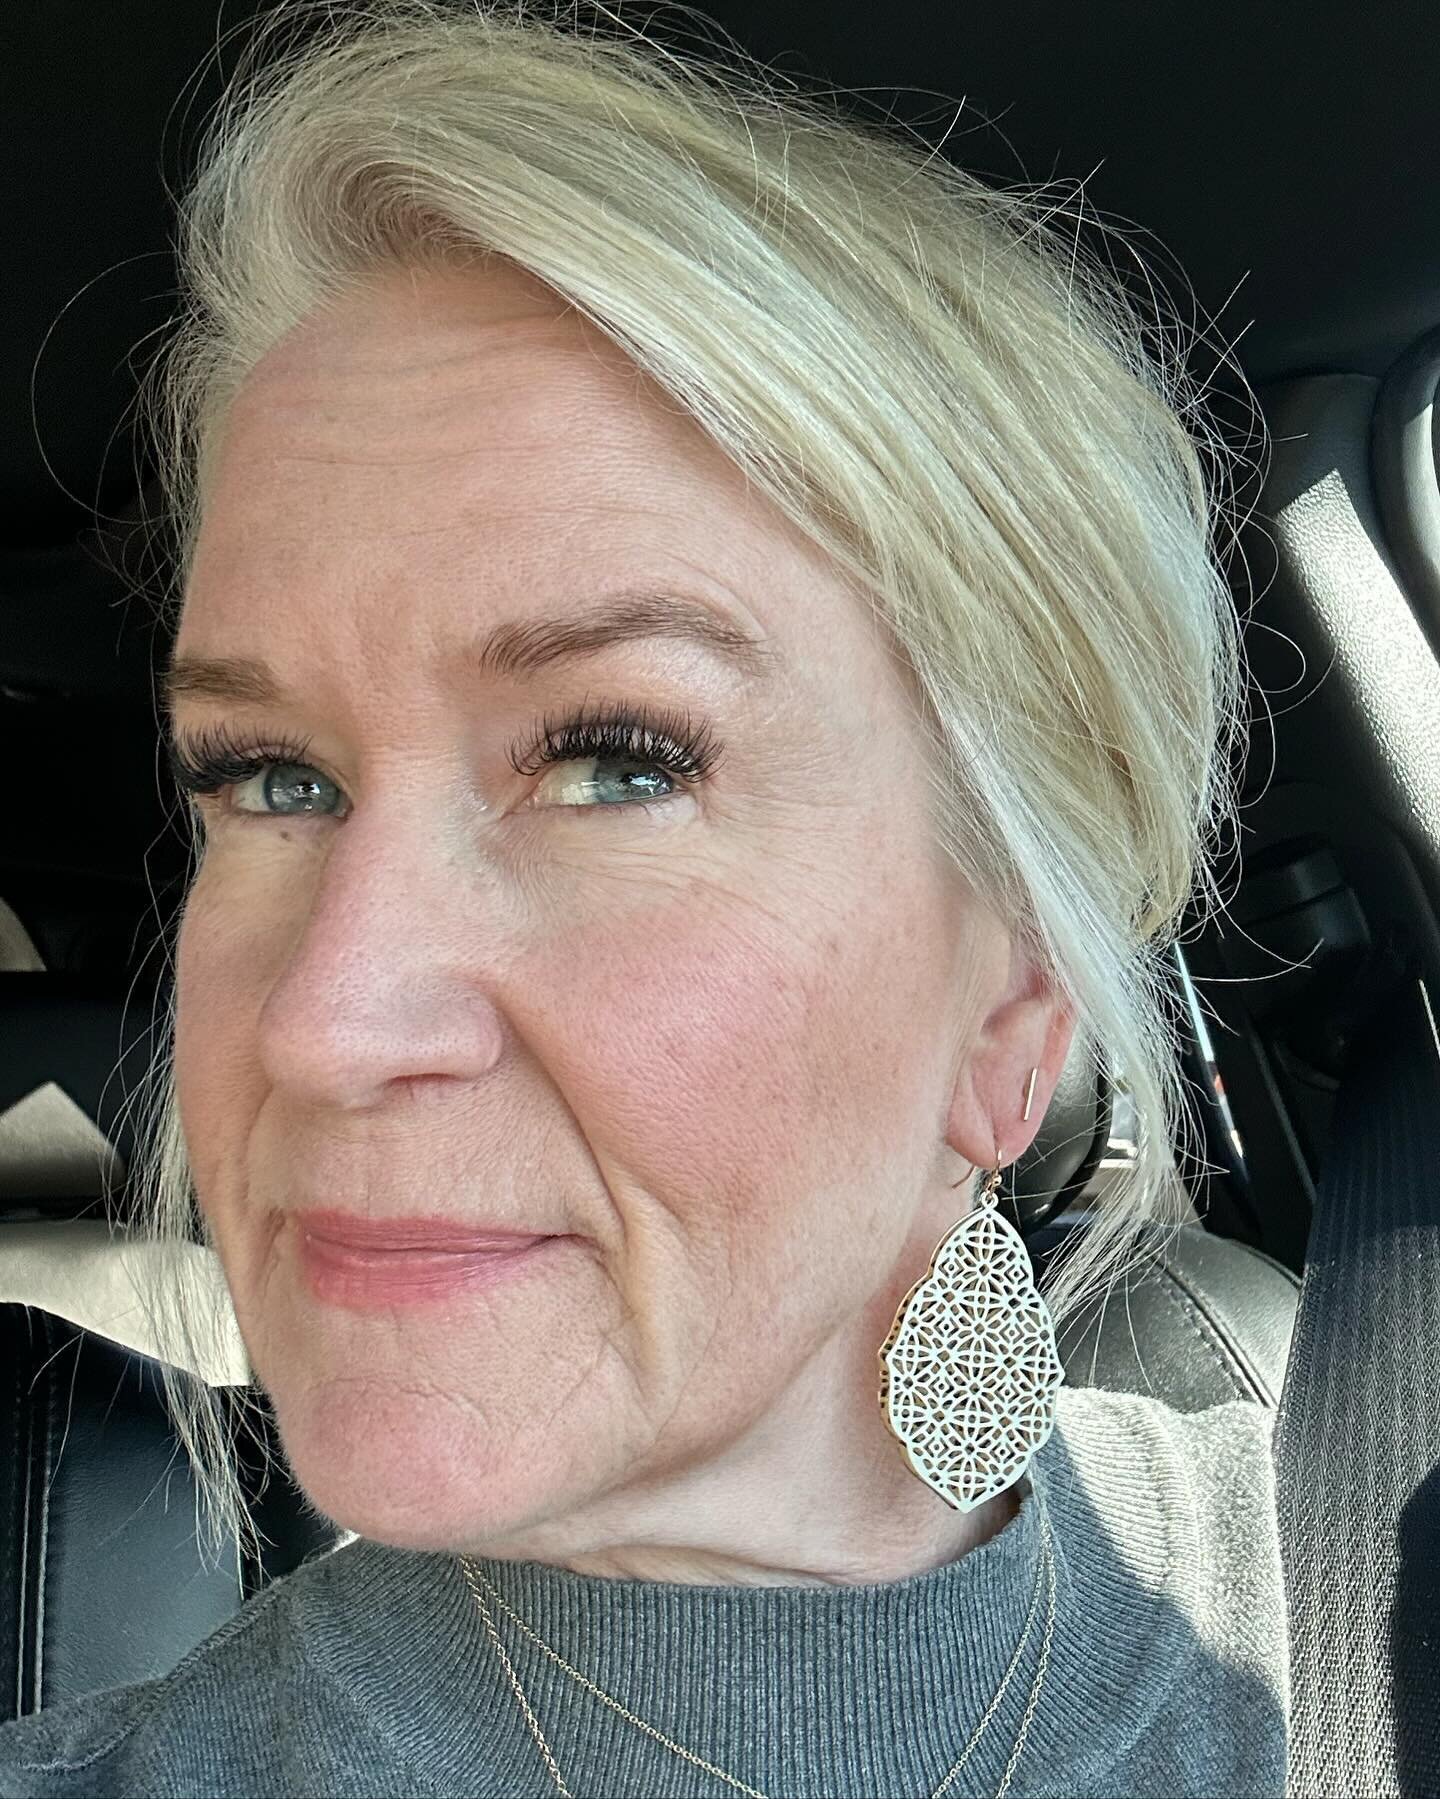 If these earrings make me sound smart today I may just call them my &lsquo;podcast earrings.&rsquo; 
Lets go @drjoanneehall #happyisthenewhealthy